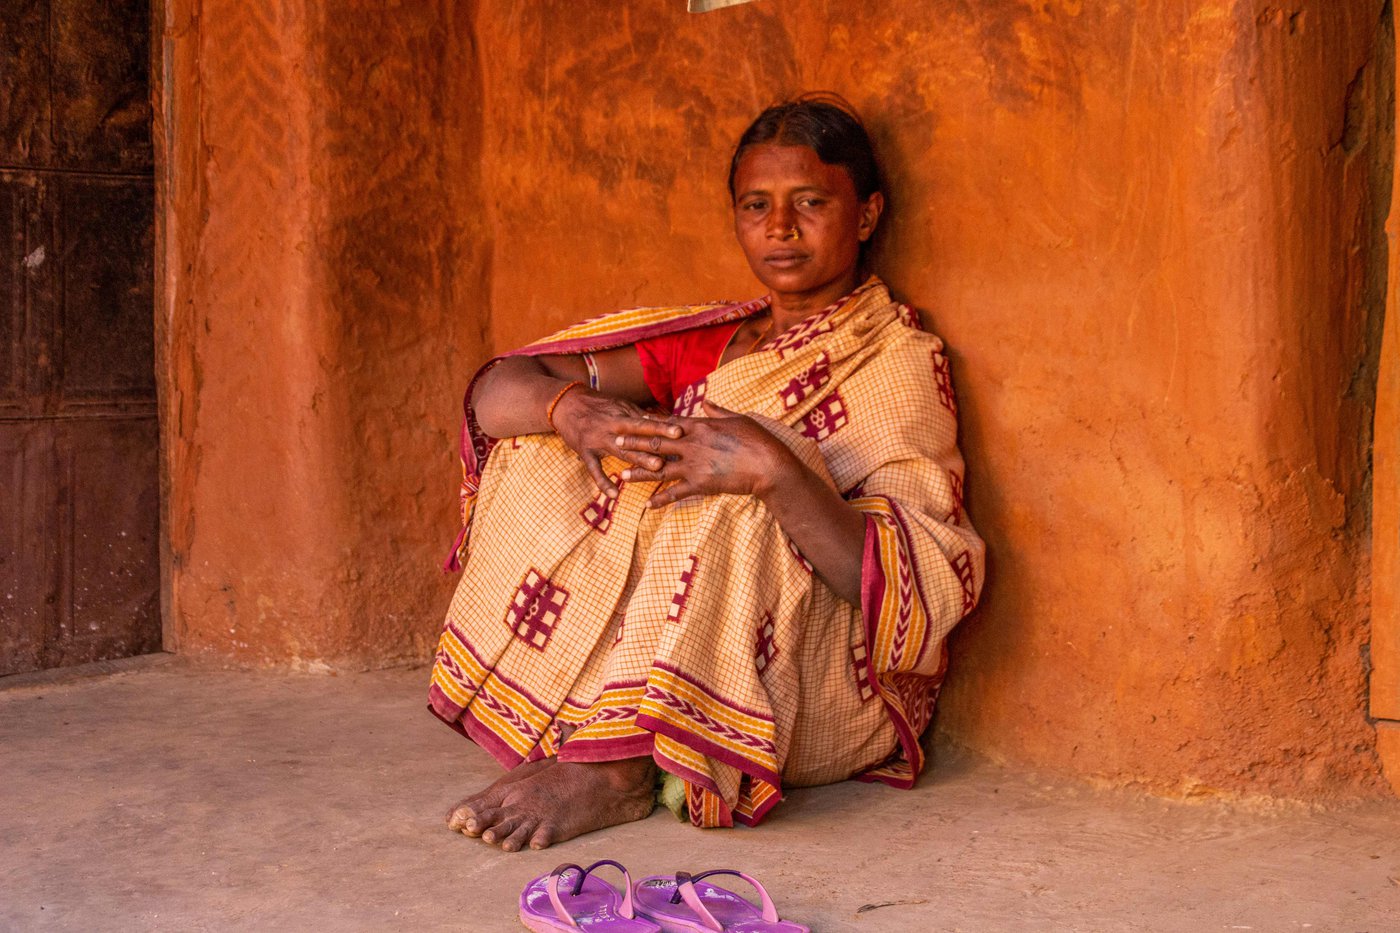 Supari Putel, a daily wage labourer from Odisha’s Balangir district, lost her husband and son within four months in 2019, and has since struggled with sorrow, never-receding debt, and an incomplete house